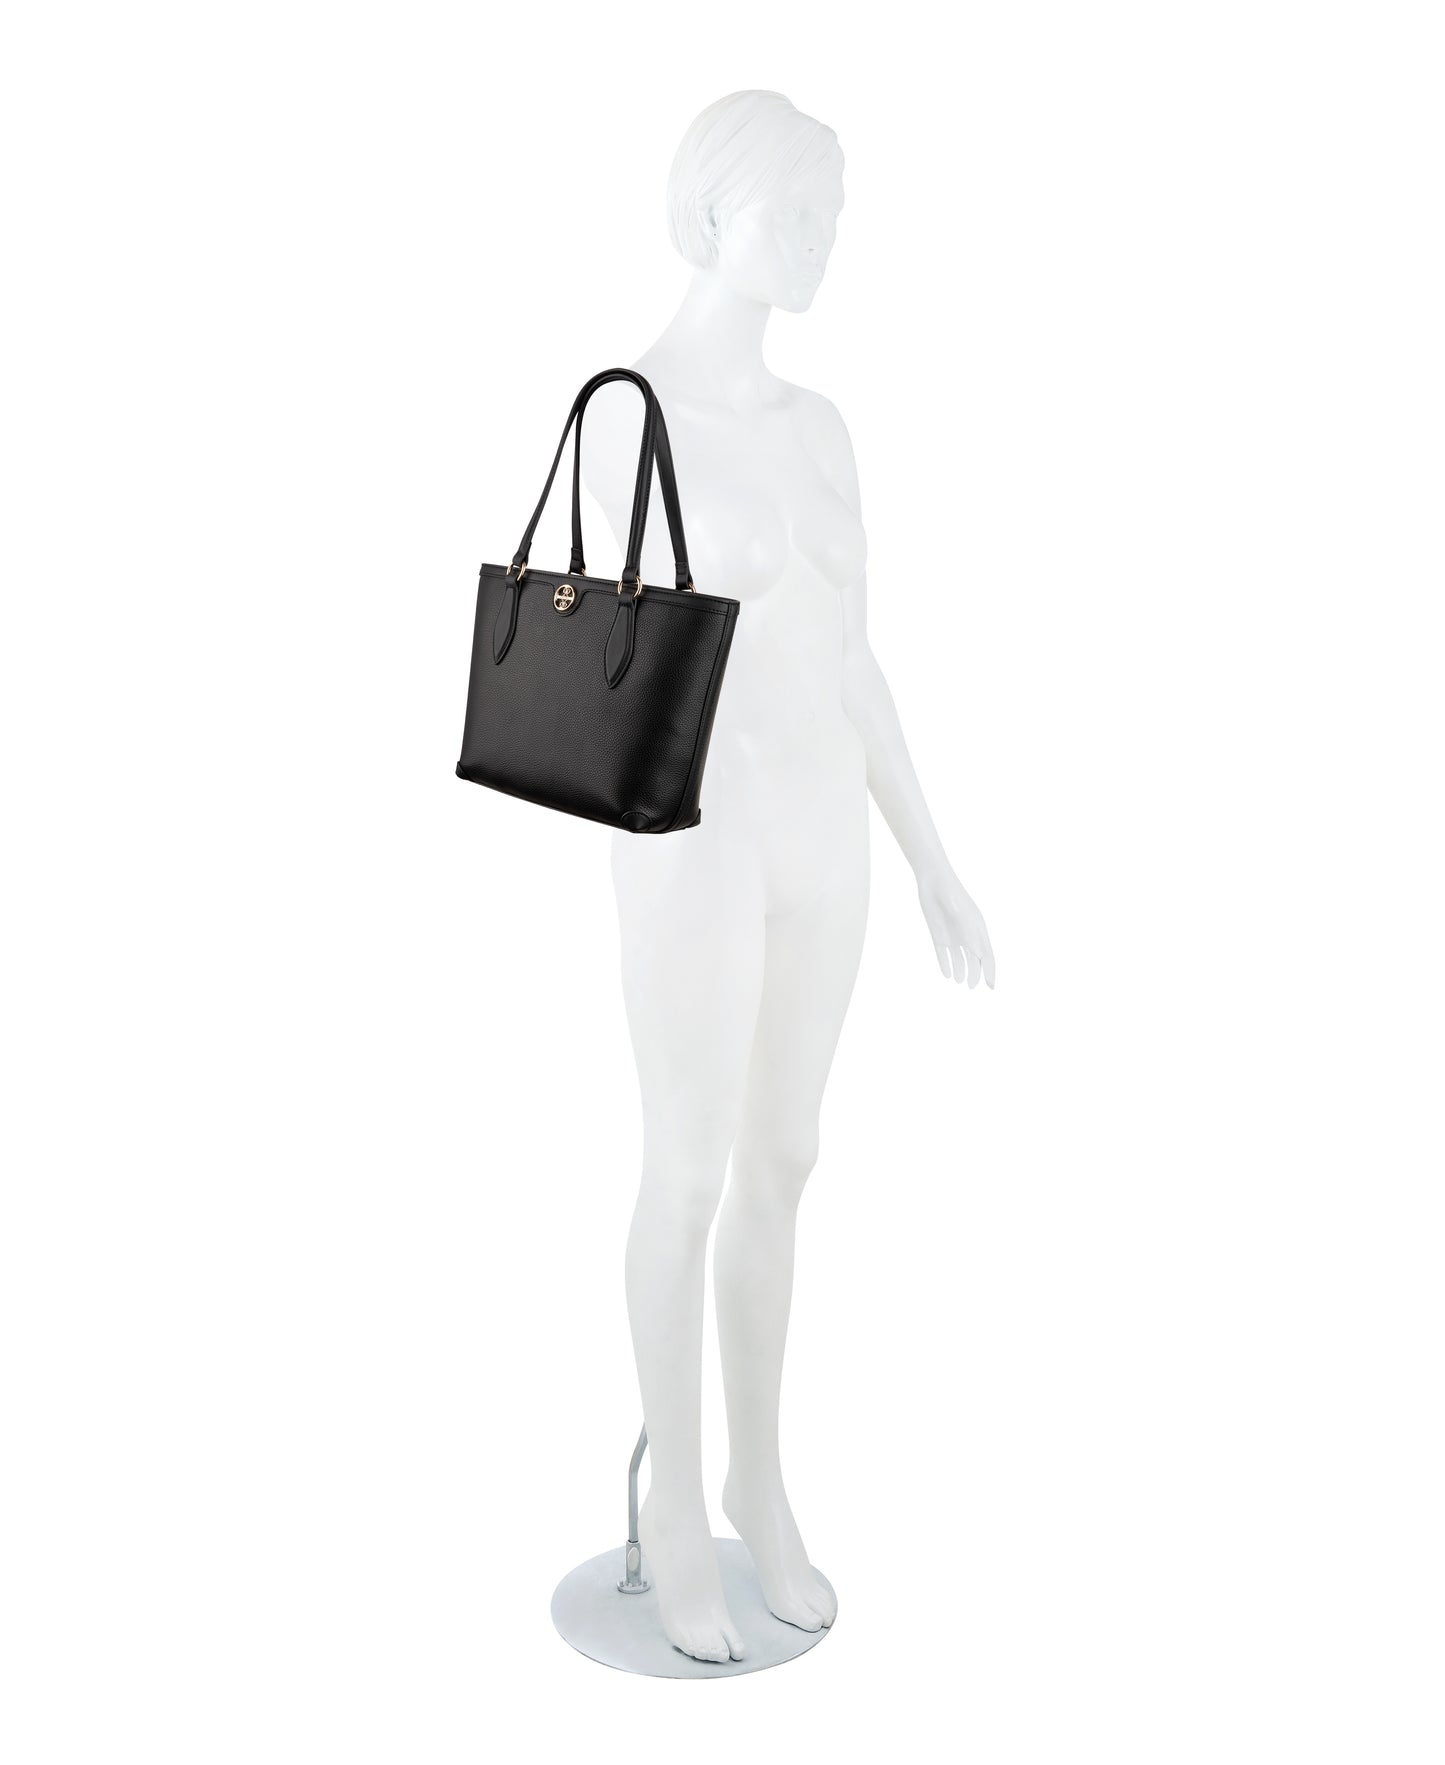 Kyelle Small Tote Black